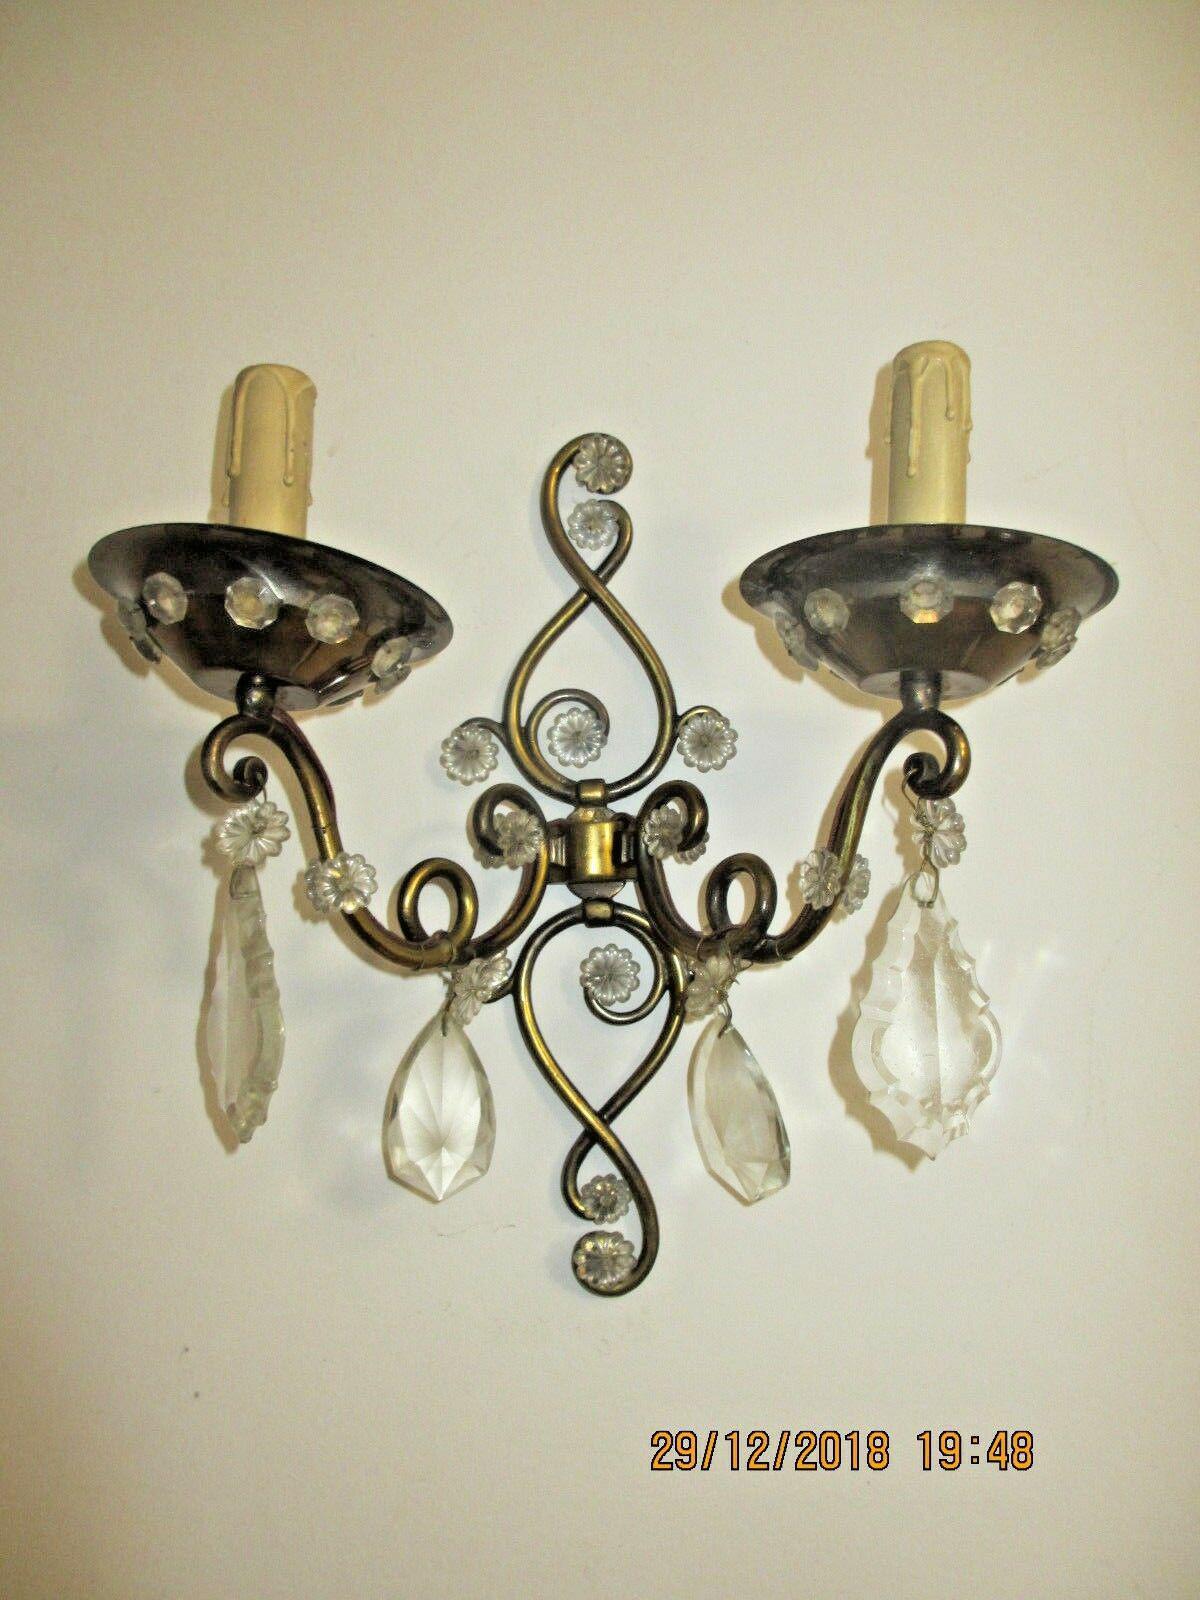 c1925 French Art Deco attrib. Maison Bagues Crystal/ Scrolled Iron Wall Sconces For Sale 2